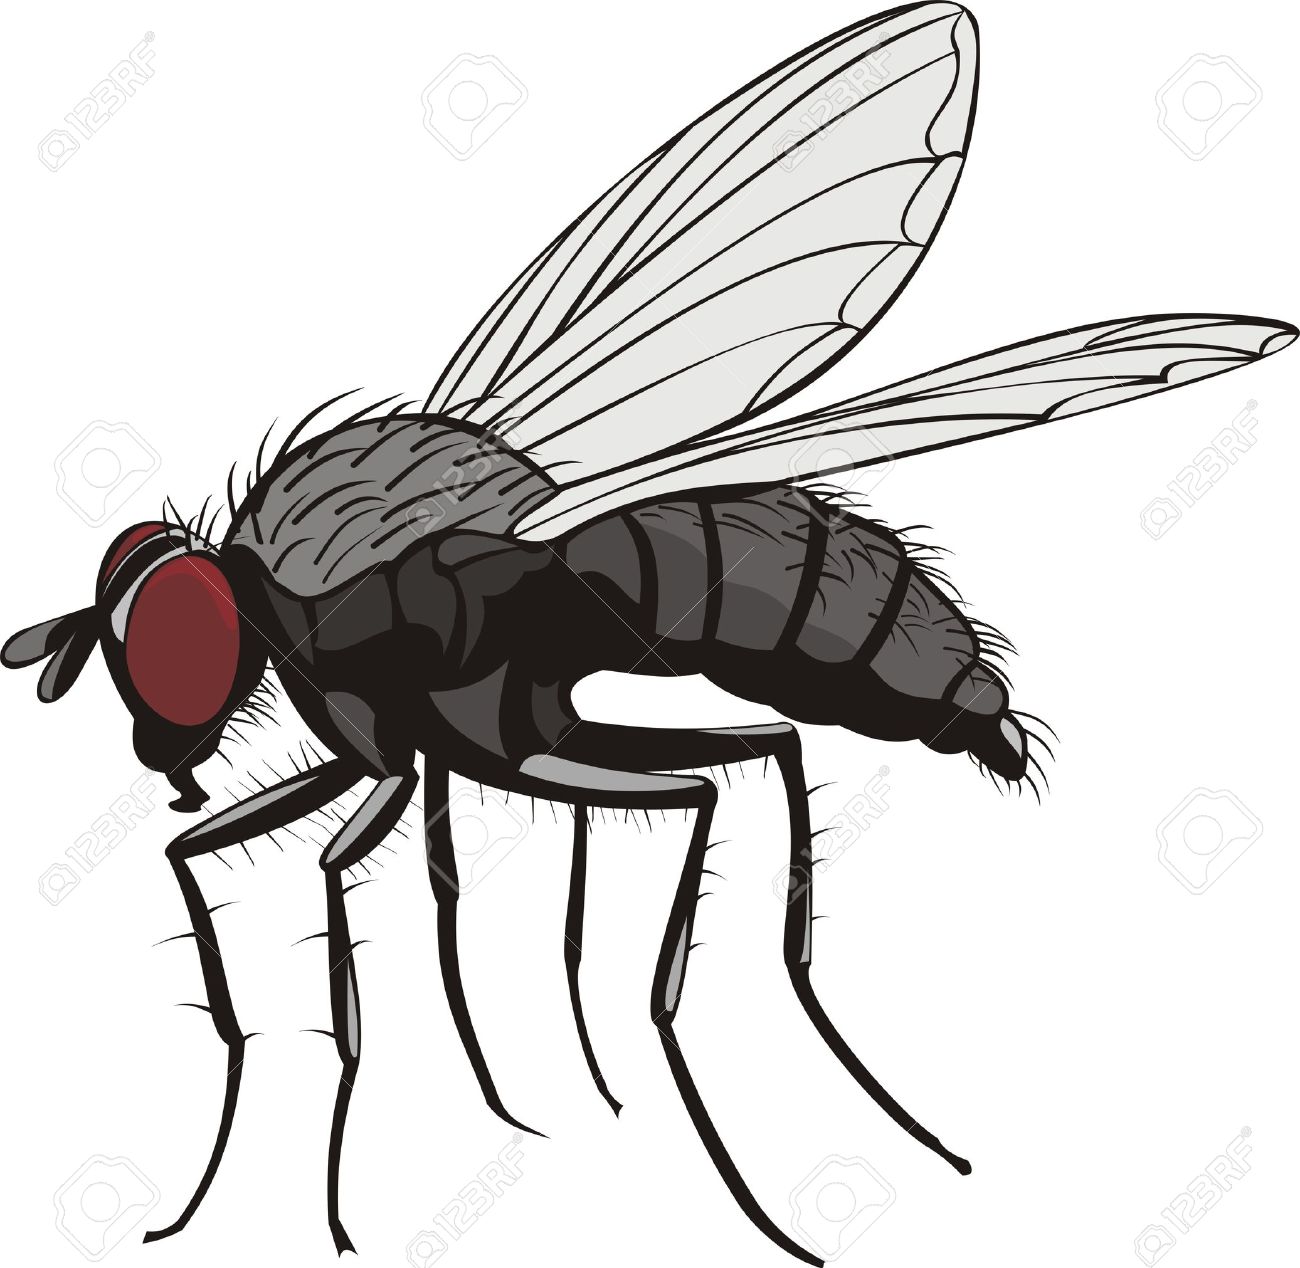 winged insects clipart - photo #2